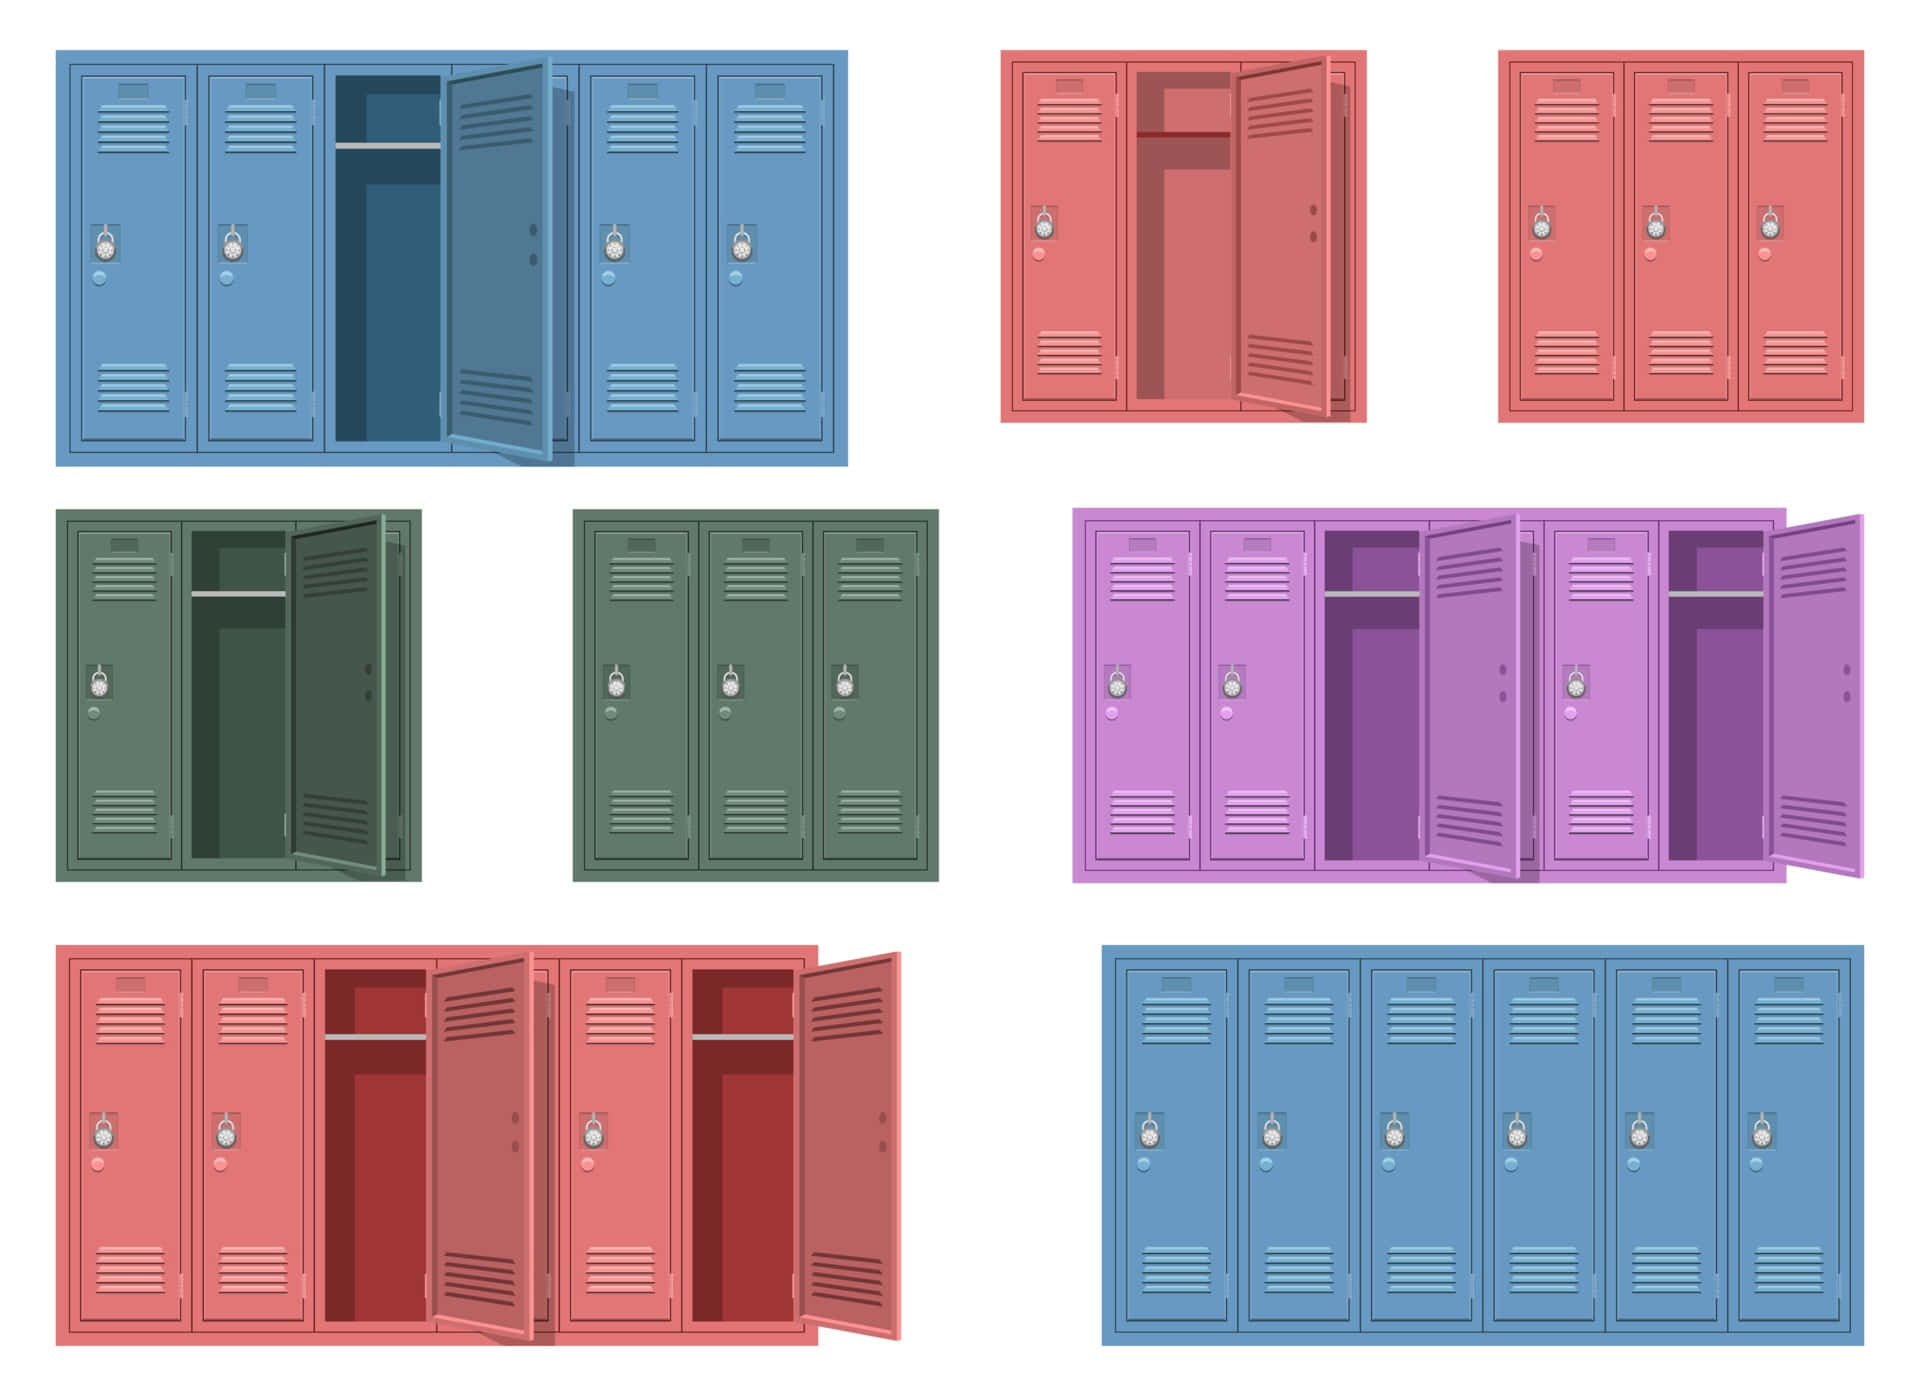 Colorful Lockers With Doors Open On A White Background